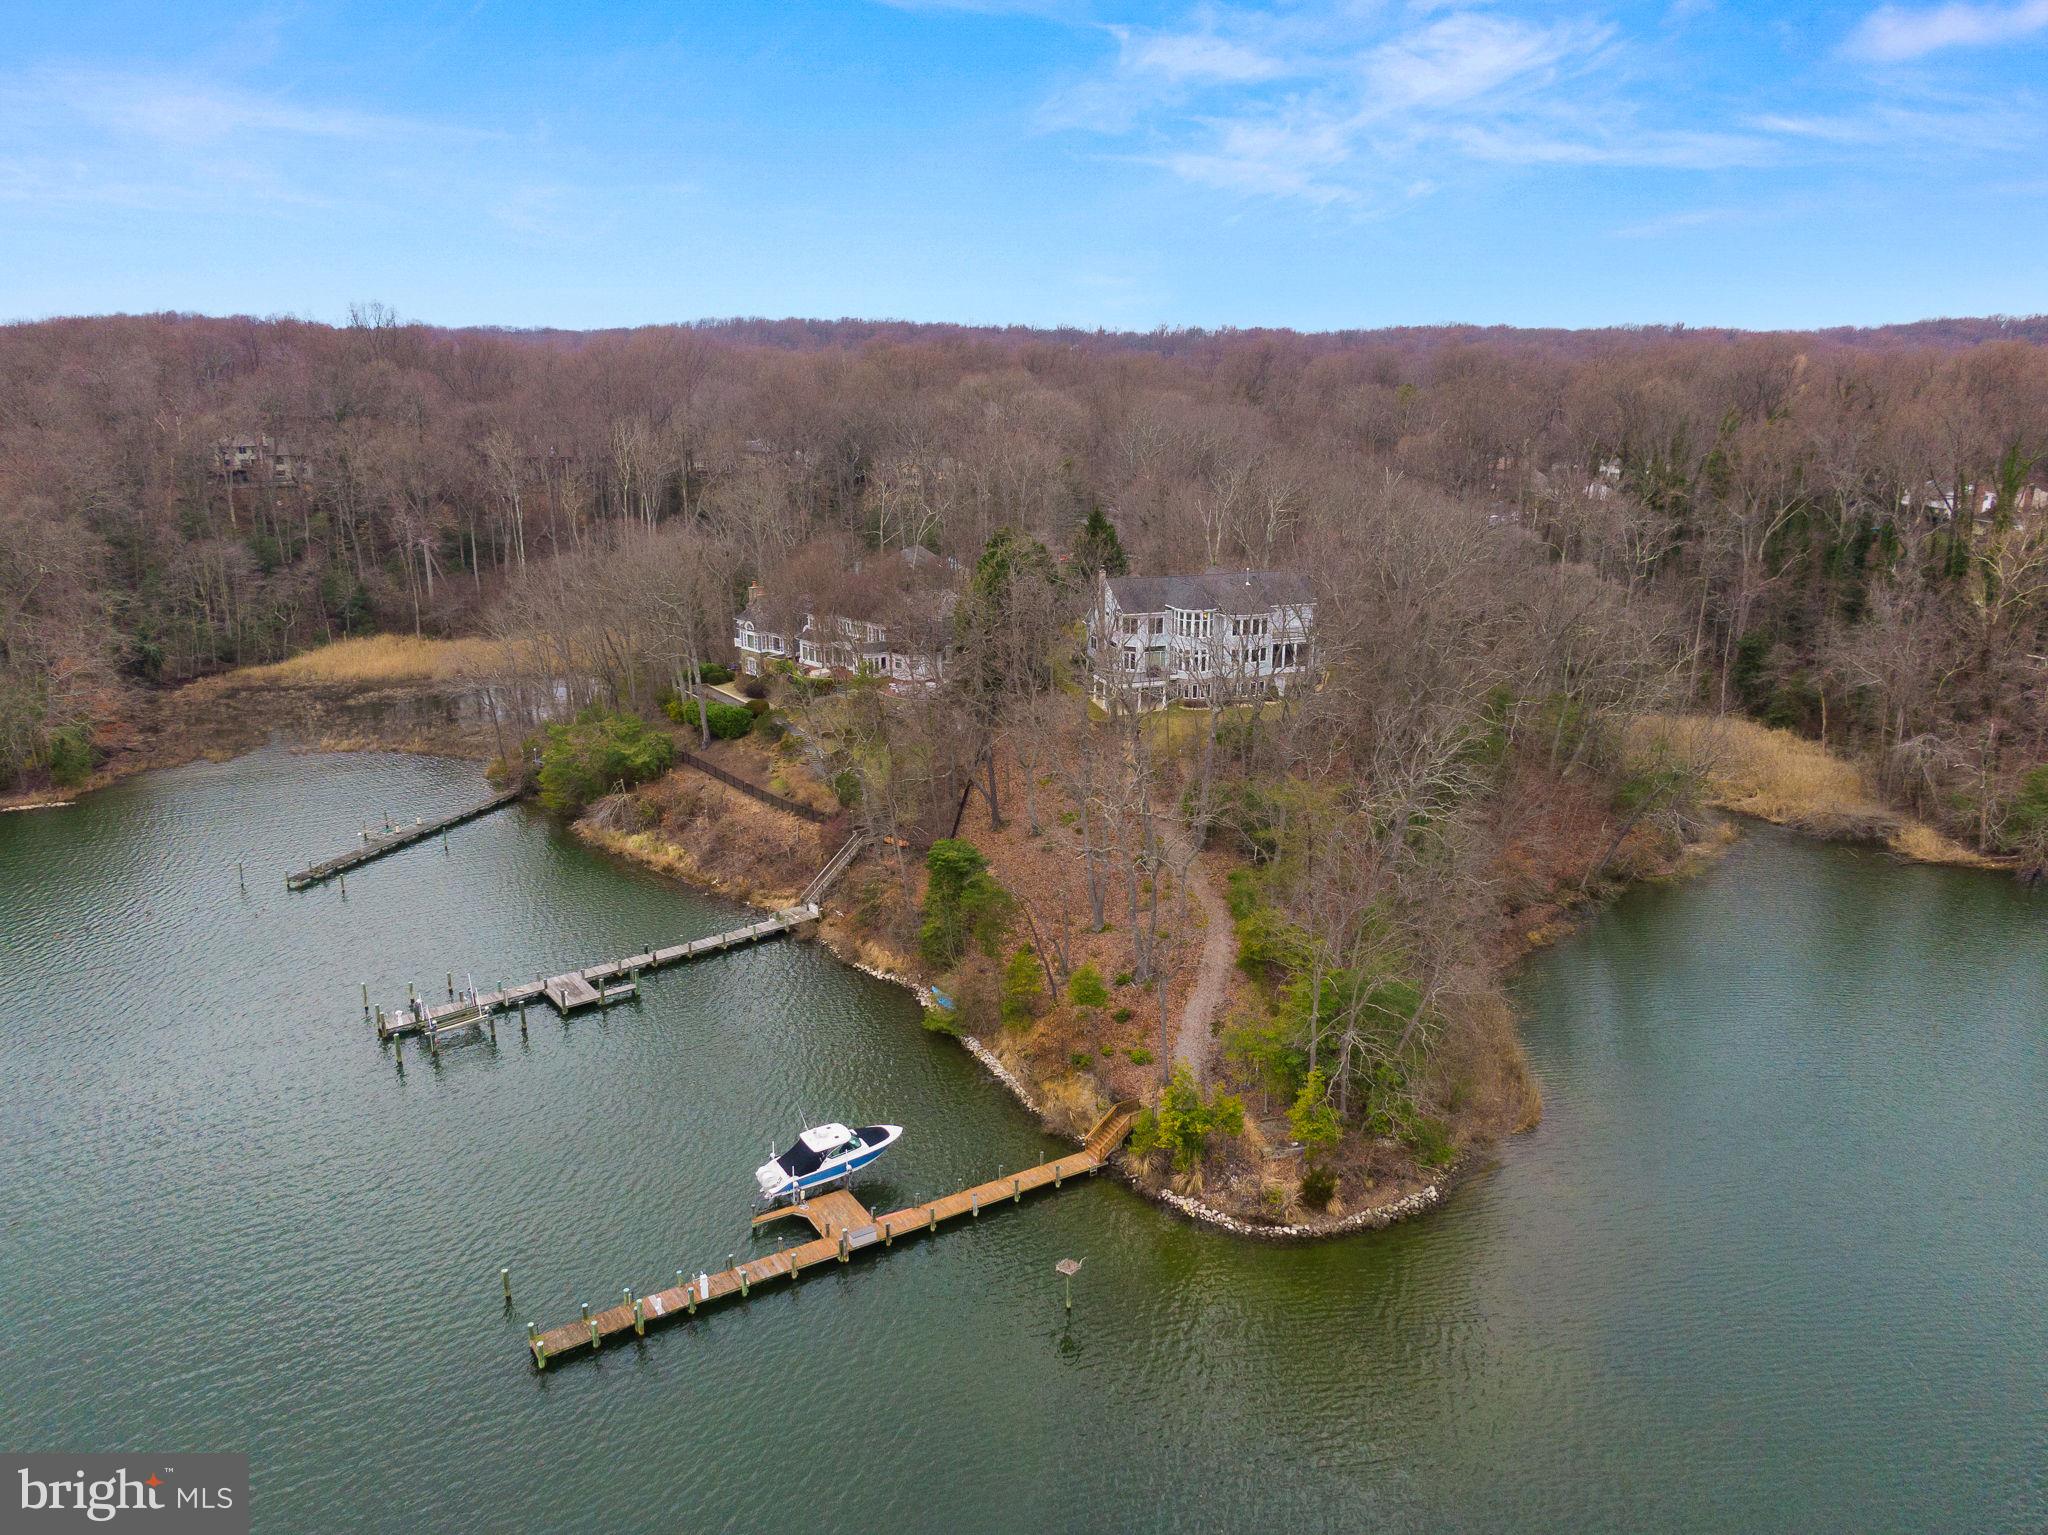 an aerial view of a house with a yard lake view